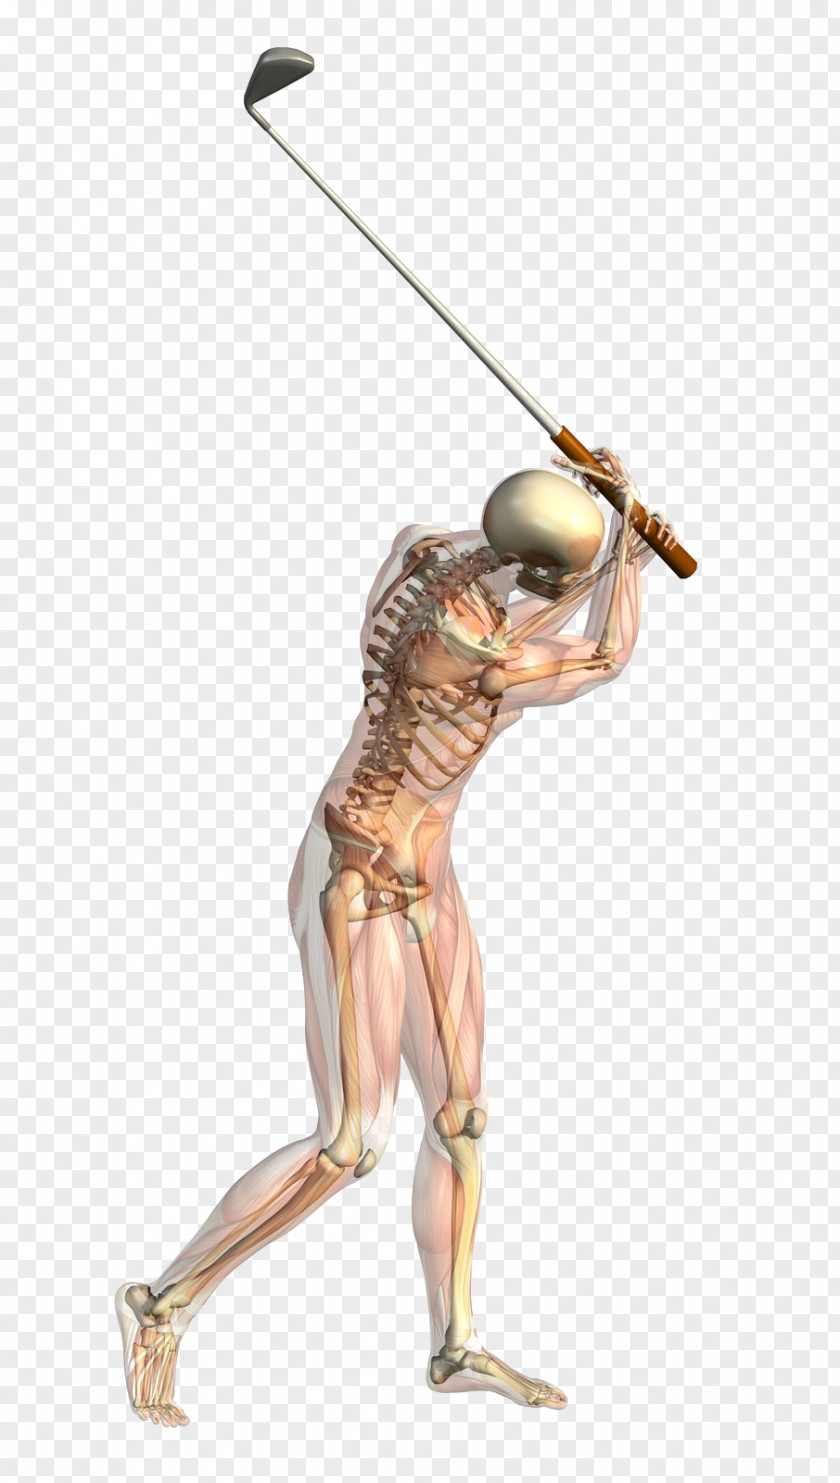 Golf Stroke Mechanics Skeleton And Muscles Anatomy Stock Photography PNG